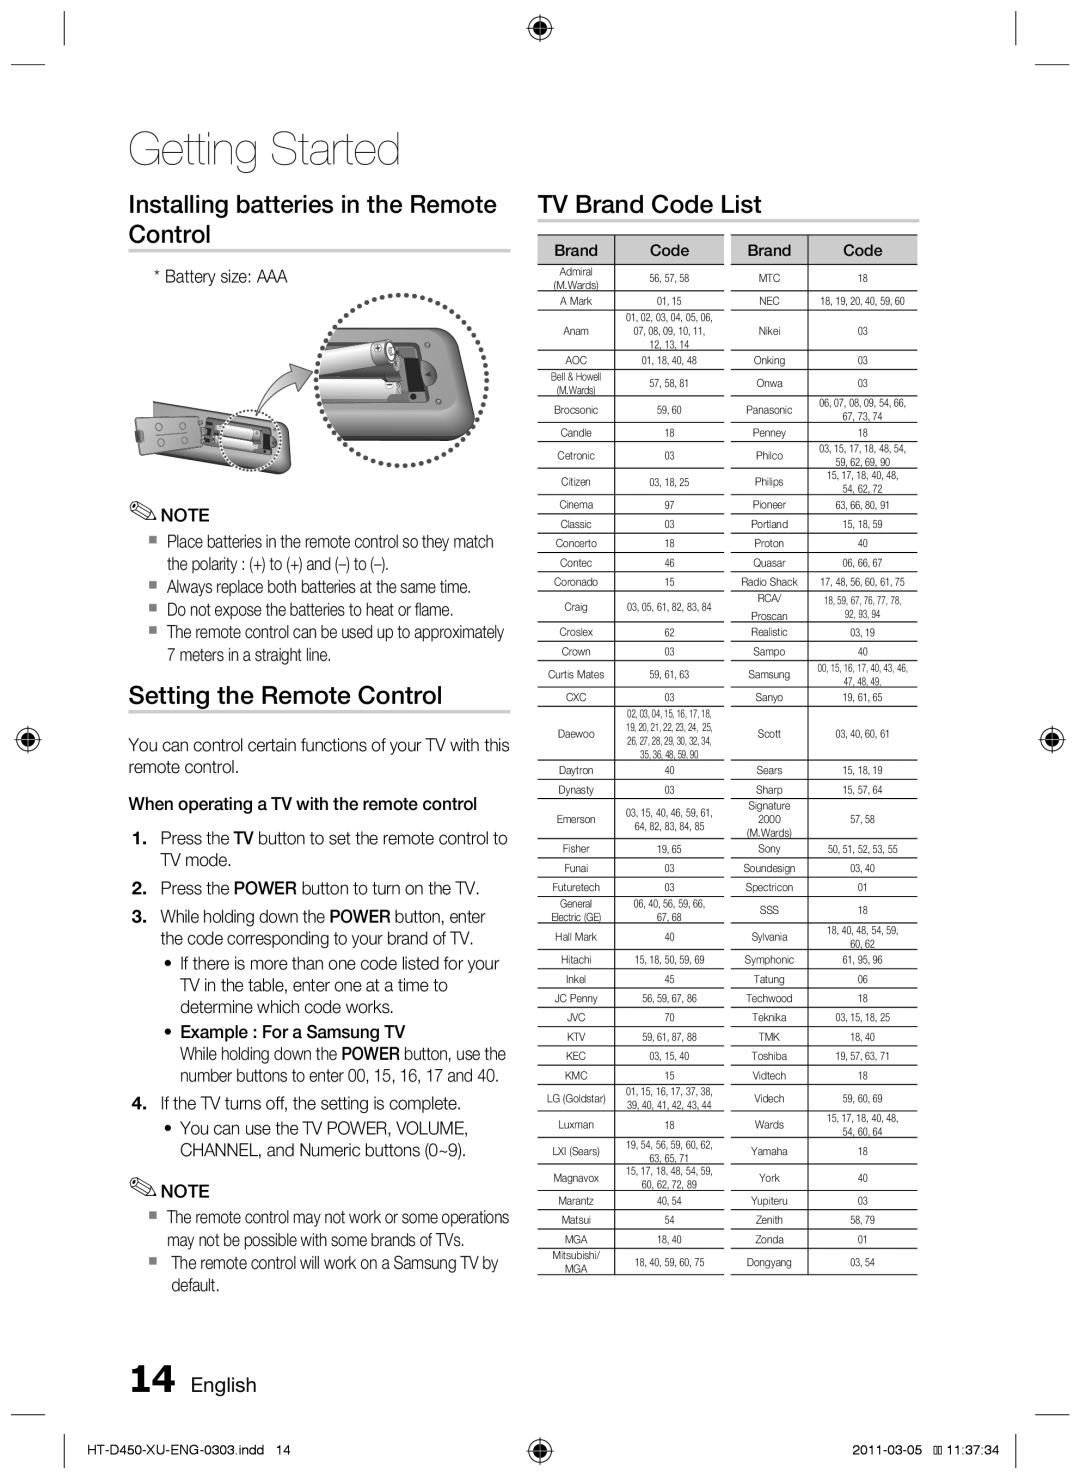 Samsung HT-D453 Installing batteries in the Remote Control, TV Brand Code List, Setting the Remote Control, English 